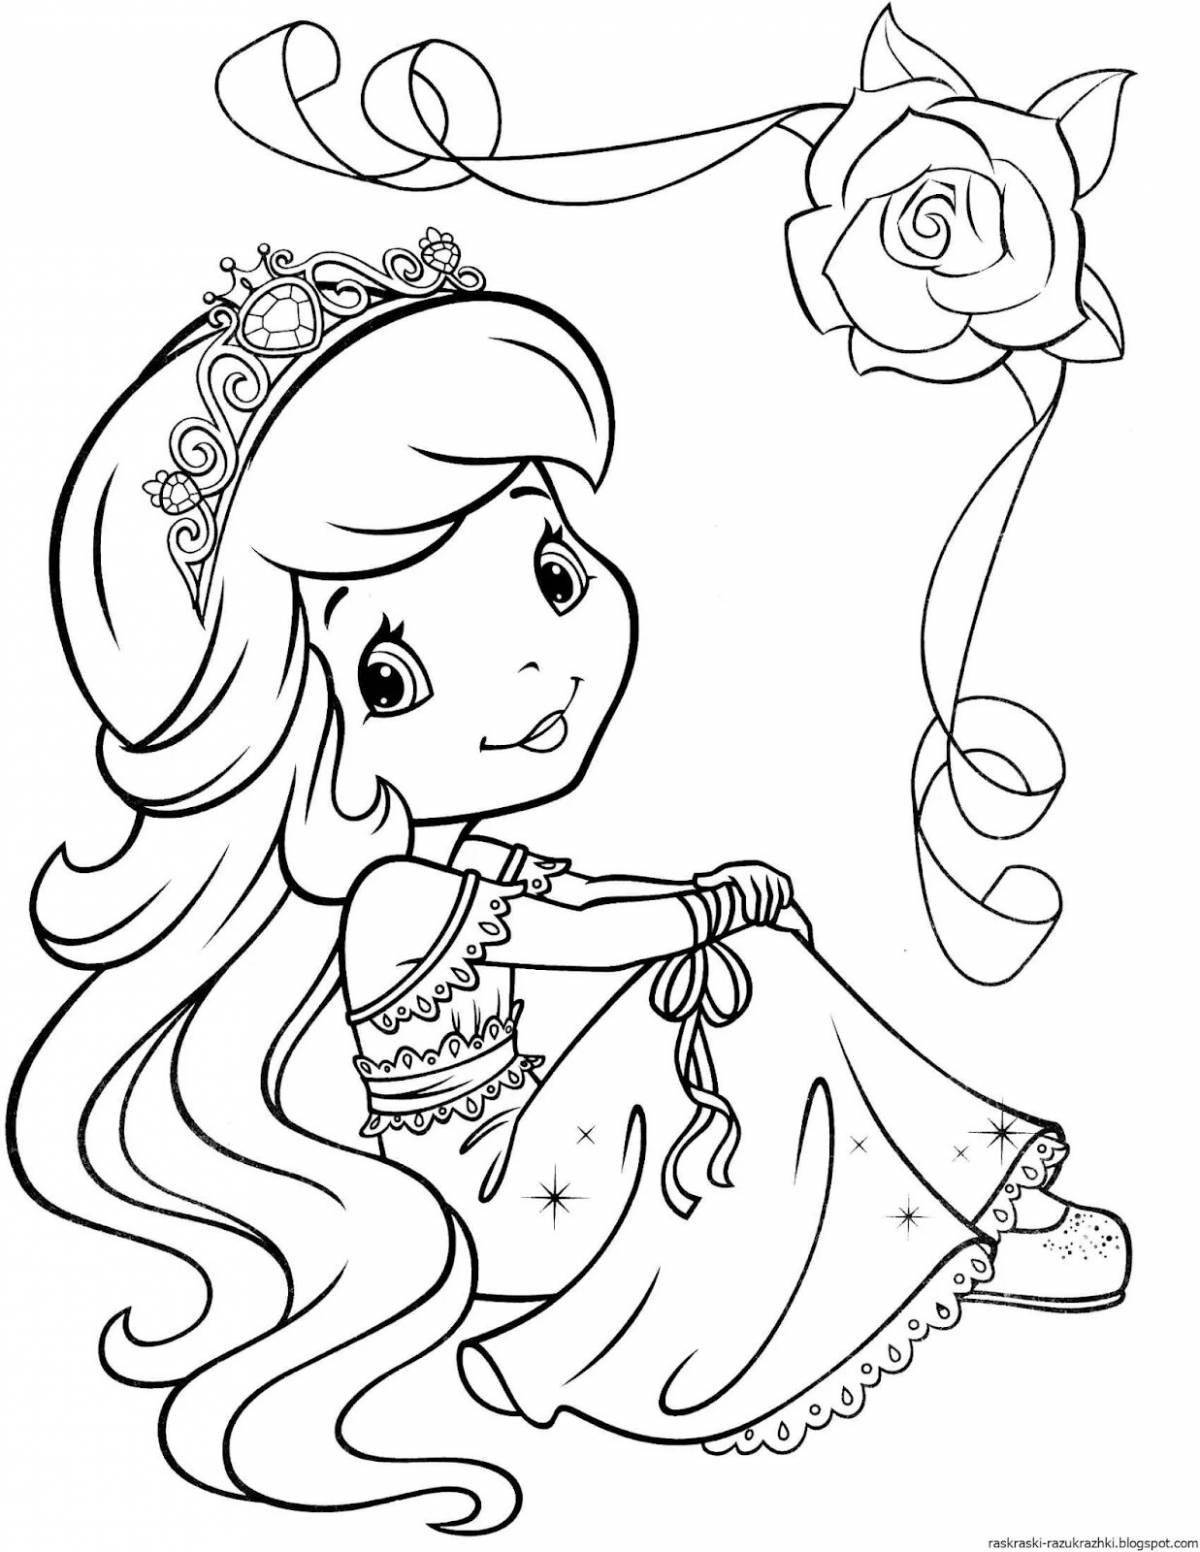 Cute coloring book for 9 year old girls